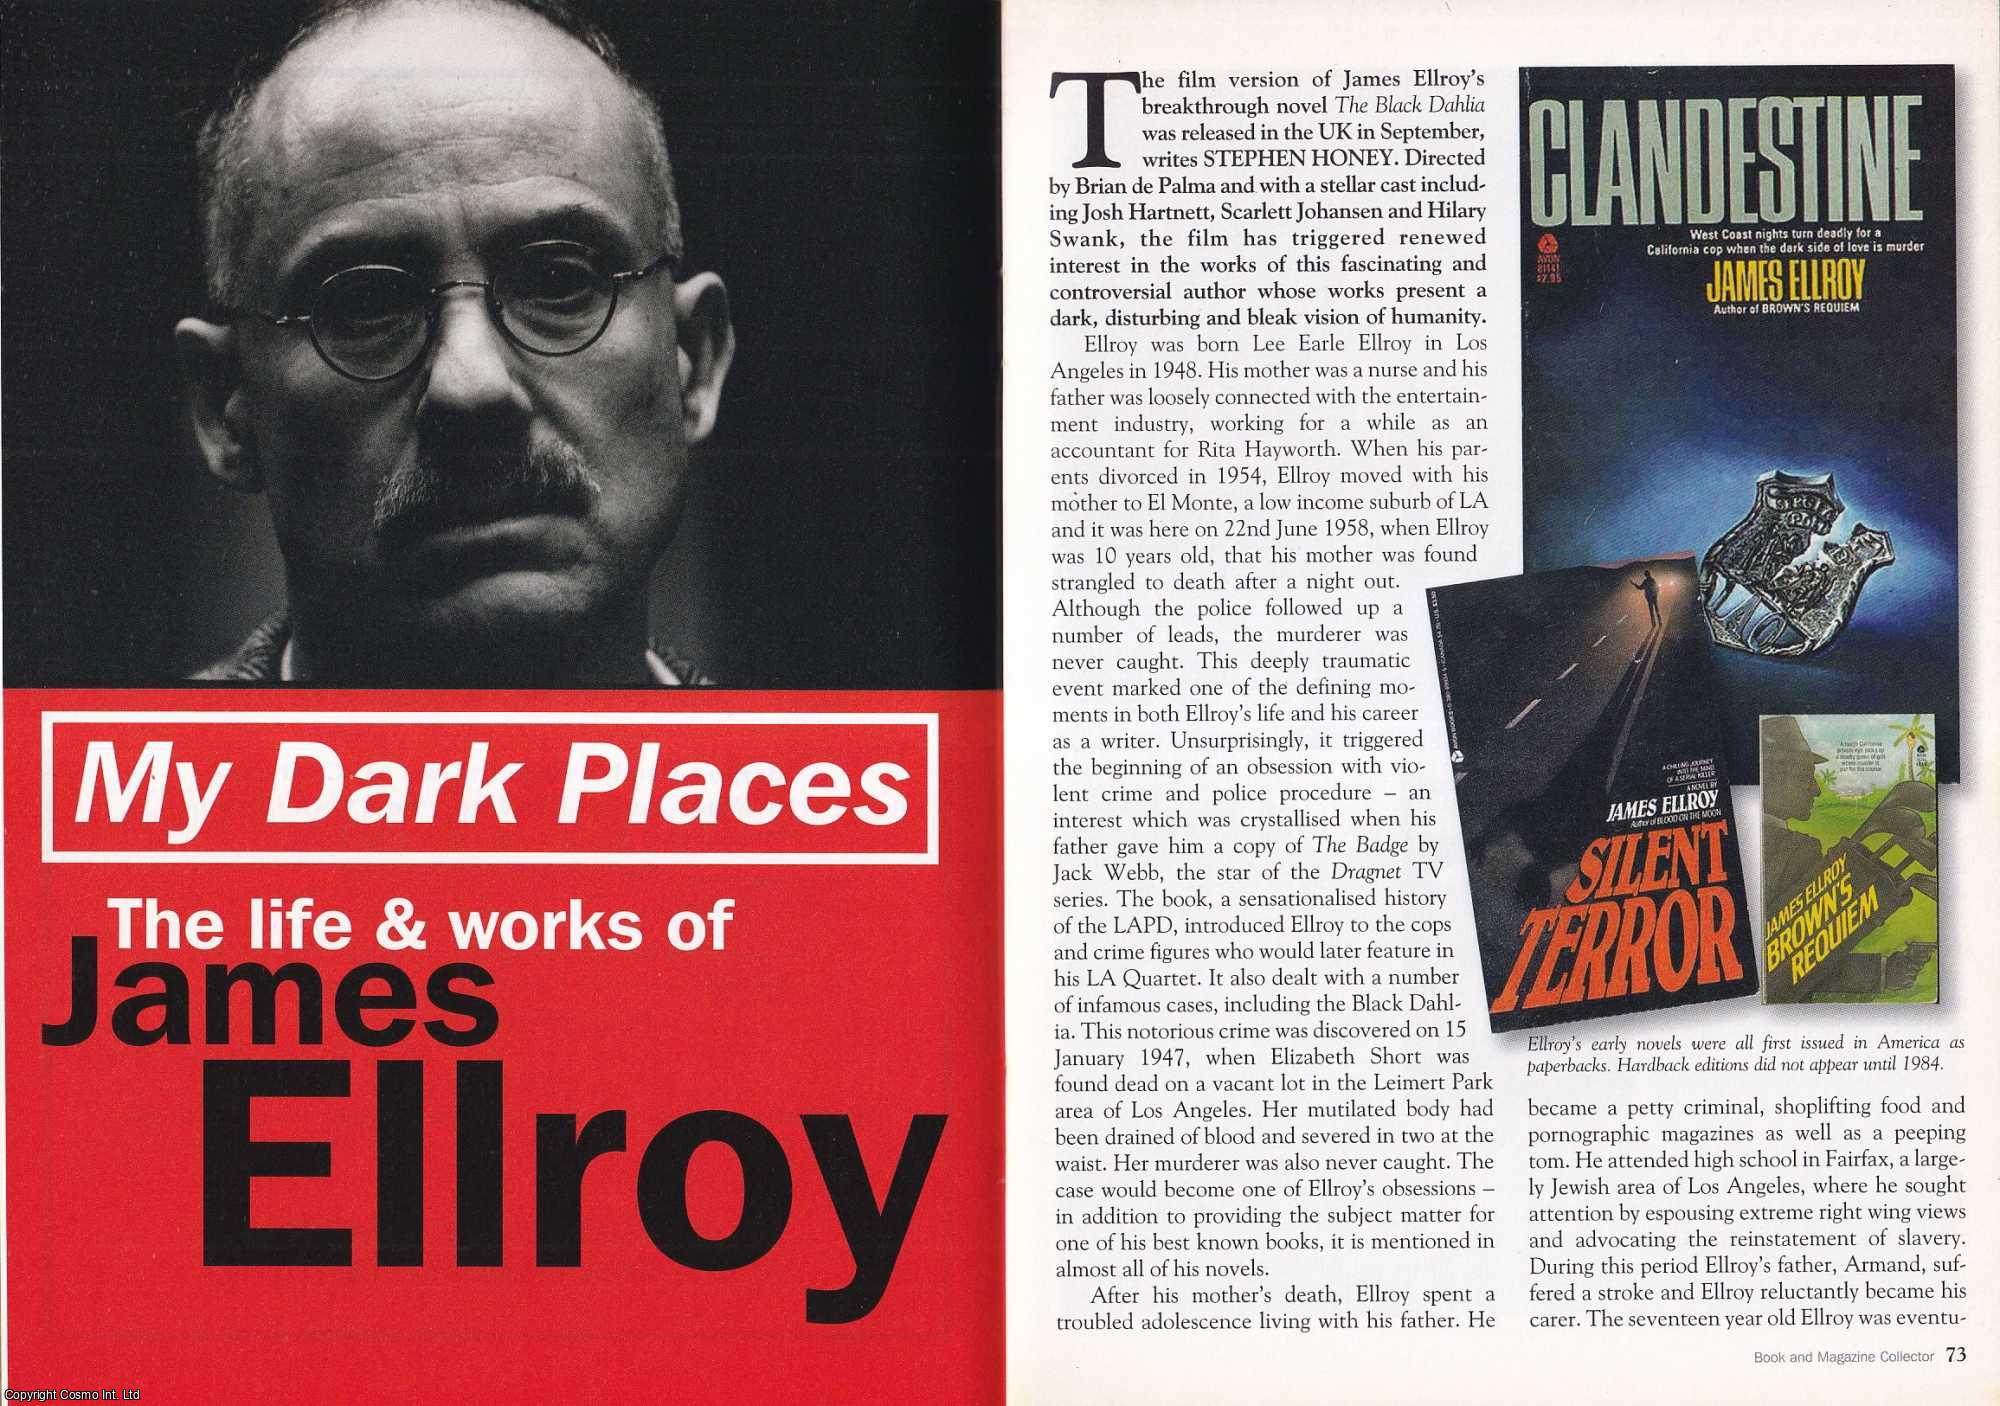 Stephen Honey - My Dark Places. The Life and Works of James Ellroy. This is an original article separated from an issue of The Book & Magazine Collector publication.